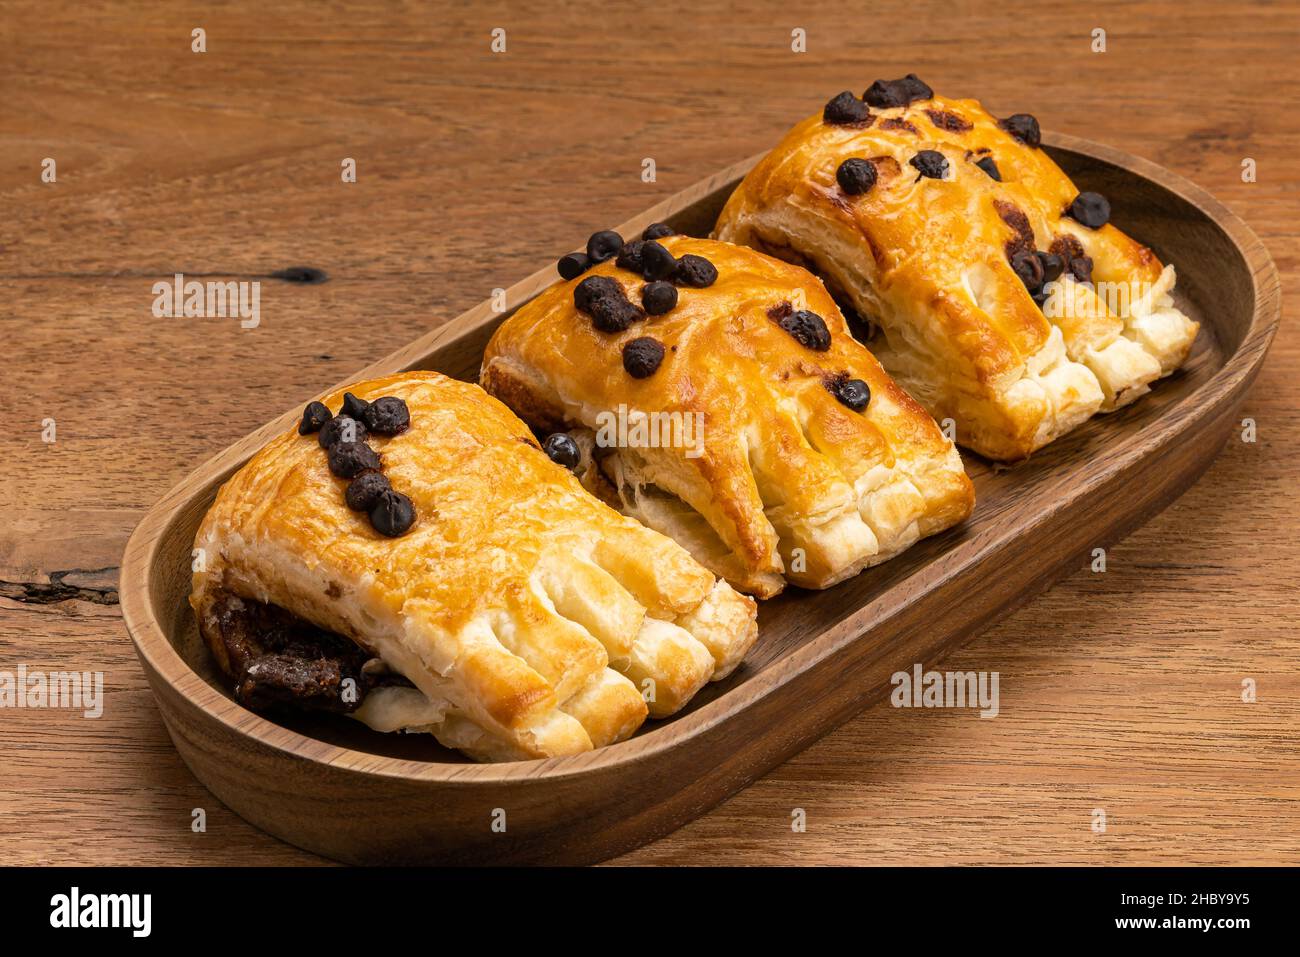 Sweet homemade Danish Pastry with chocolate cream filling topping with chocolate chips in wooden tray on wooden table. Stock Photo